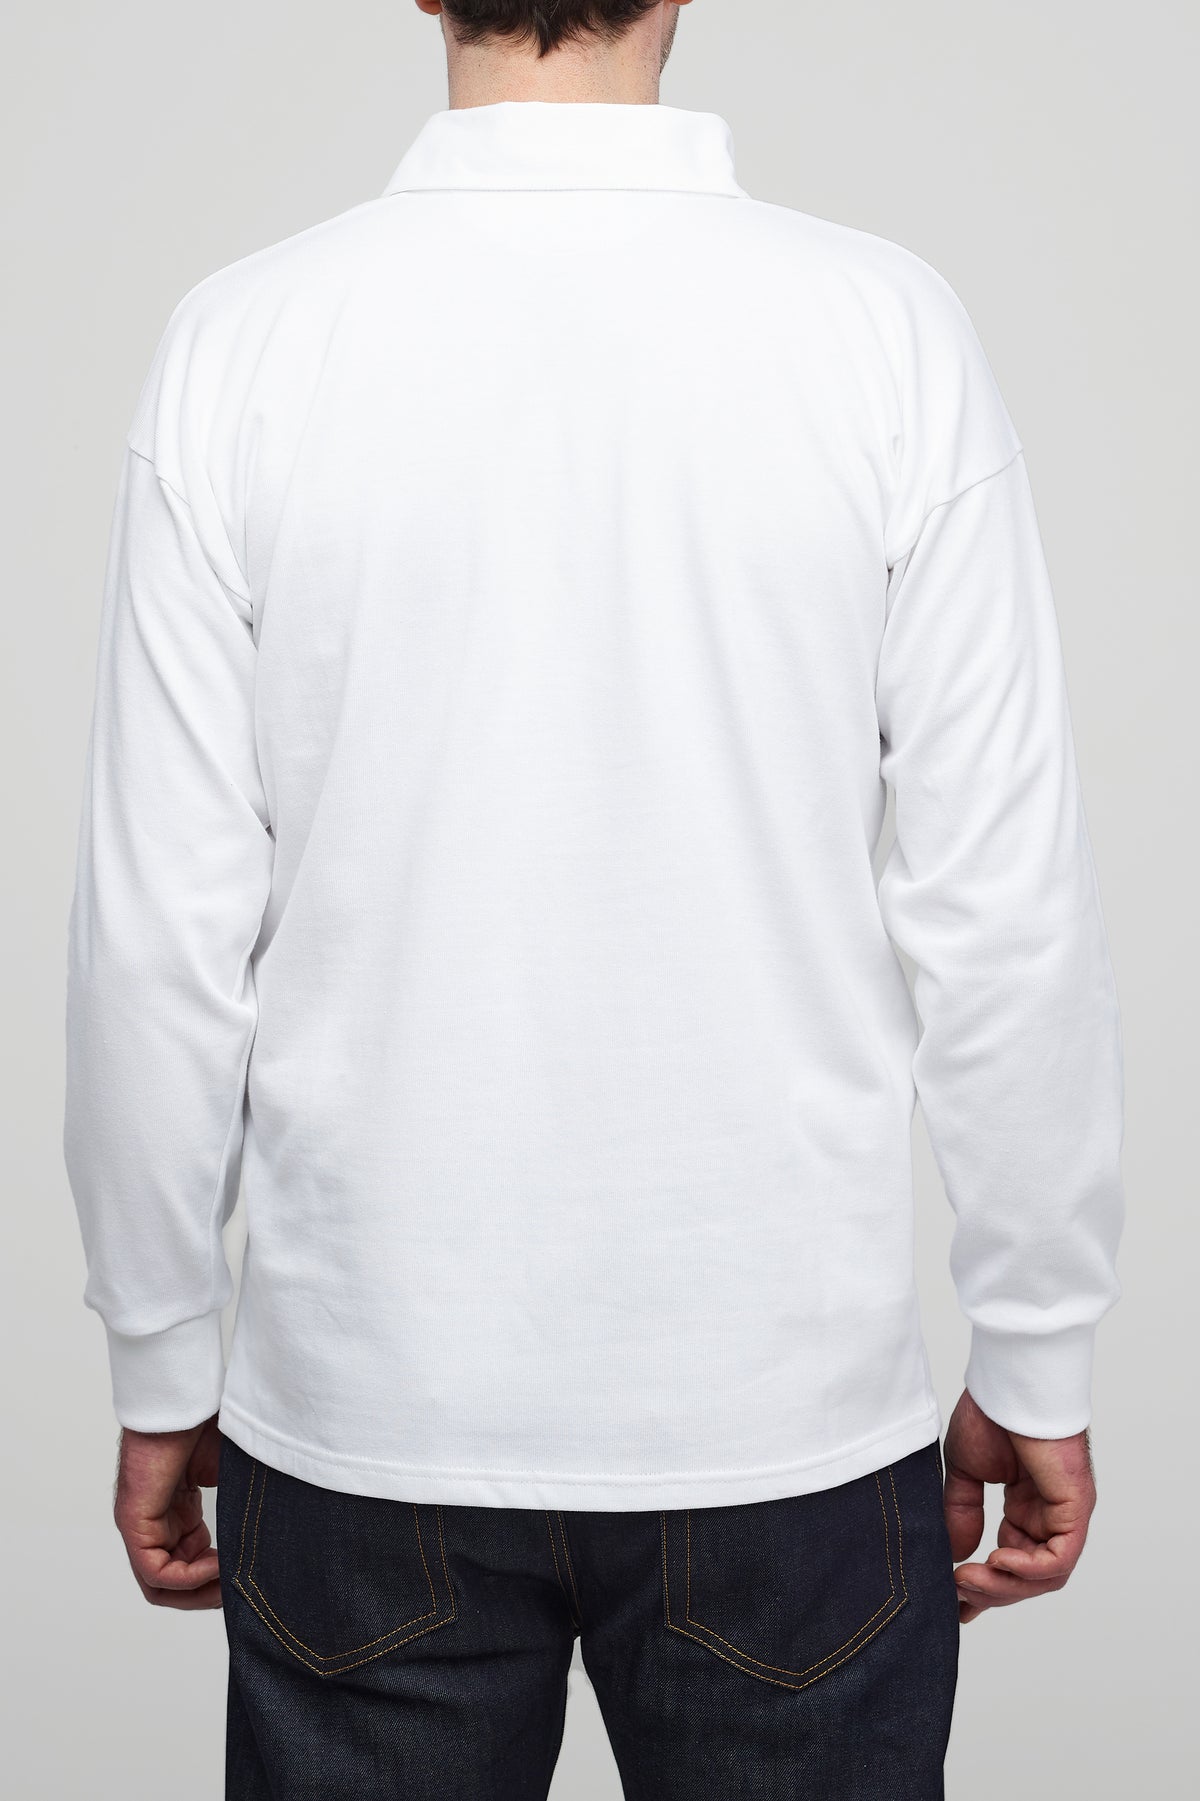 
            Thigh up image of the back of male wearing white rugby shirt